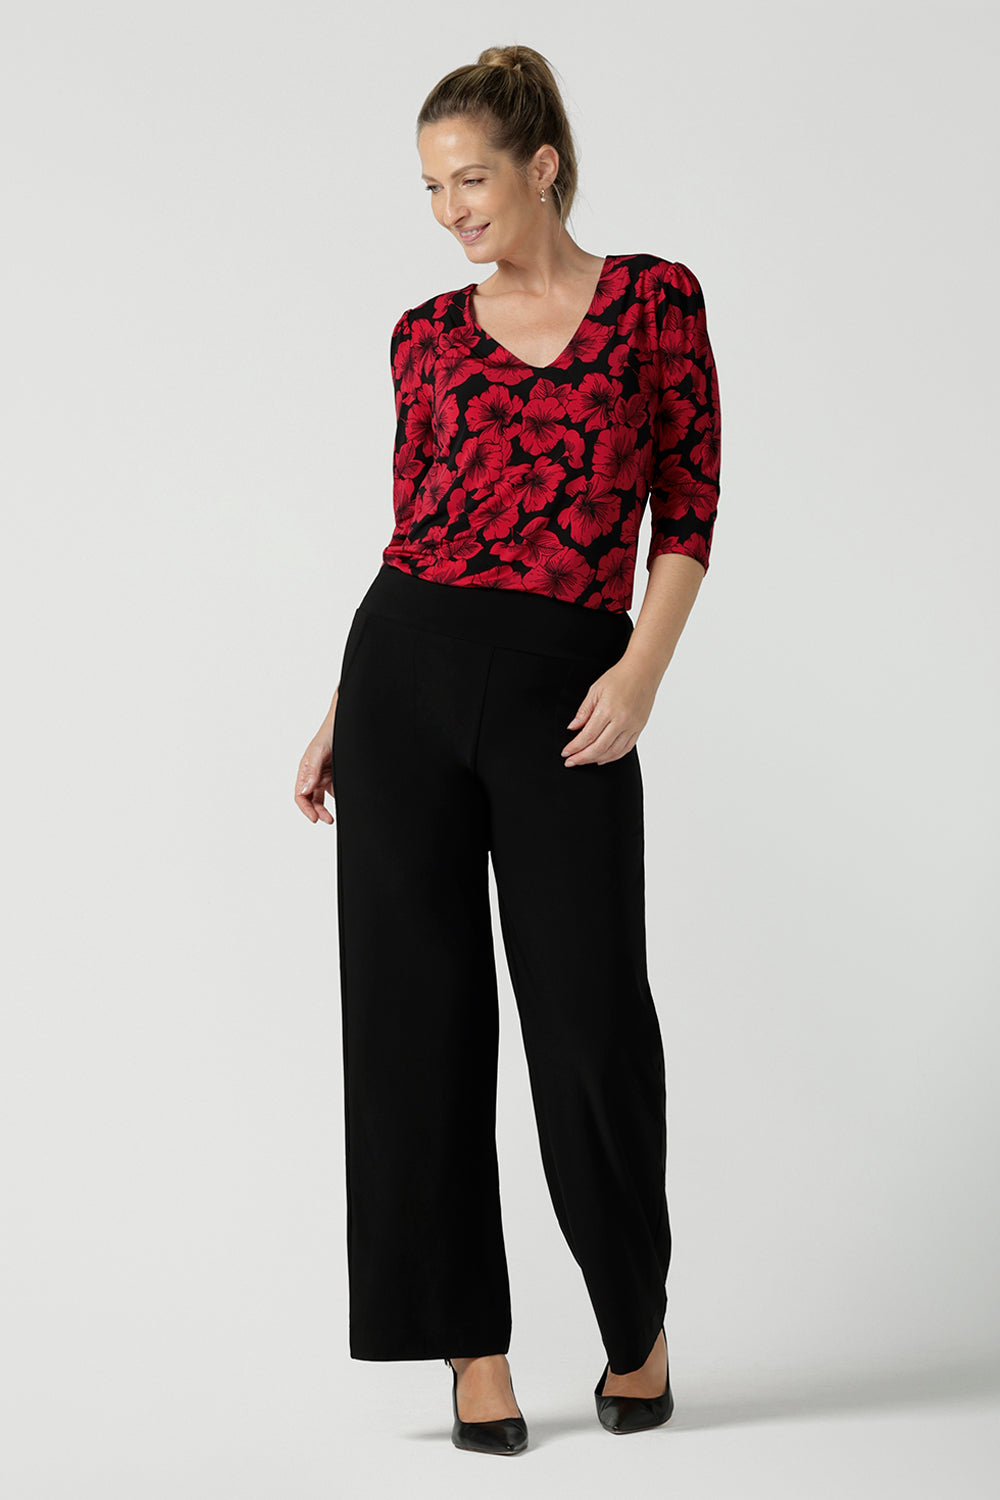 Size 10 woman wears the Vida Top with a v-neck and bold poppy floral. Comfortable workwear top for women size 8 - 24. Black base with a red flower. Versatile and comfortable workwear. Styled back with a black Monroe pants. Made in Australia for women.